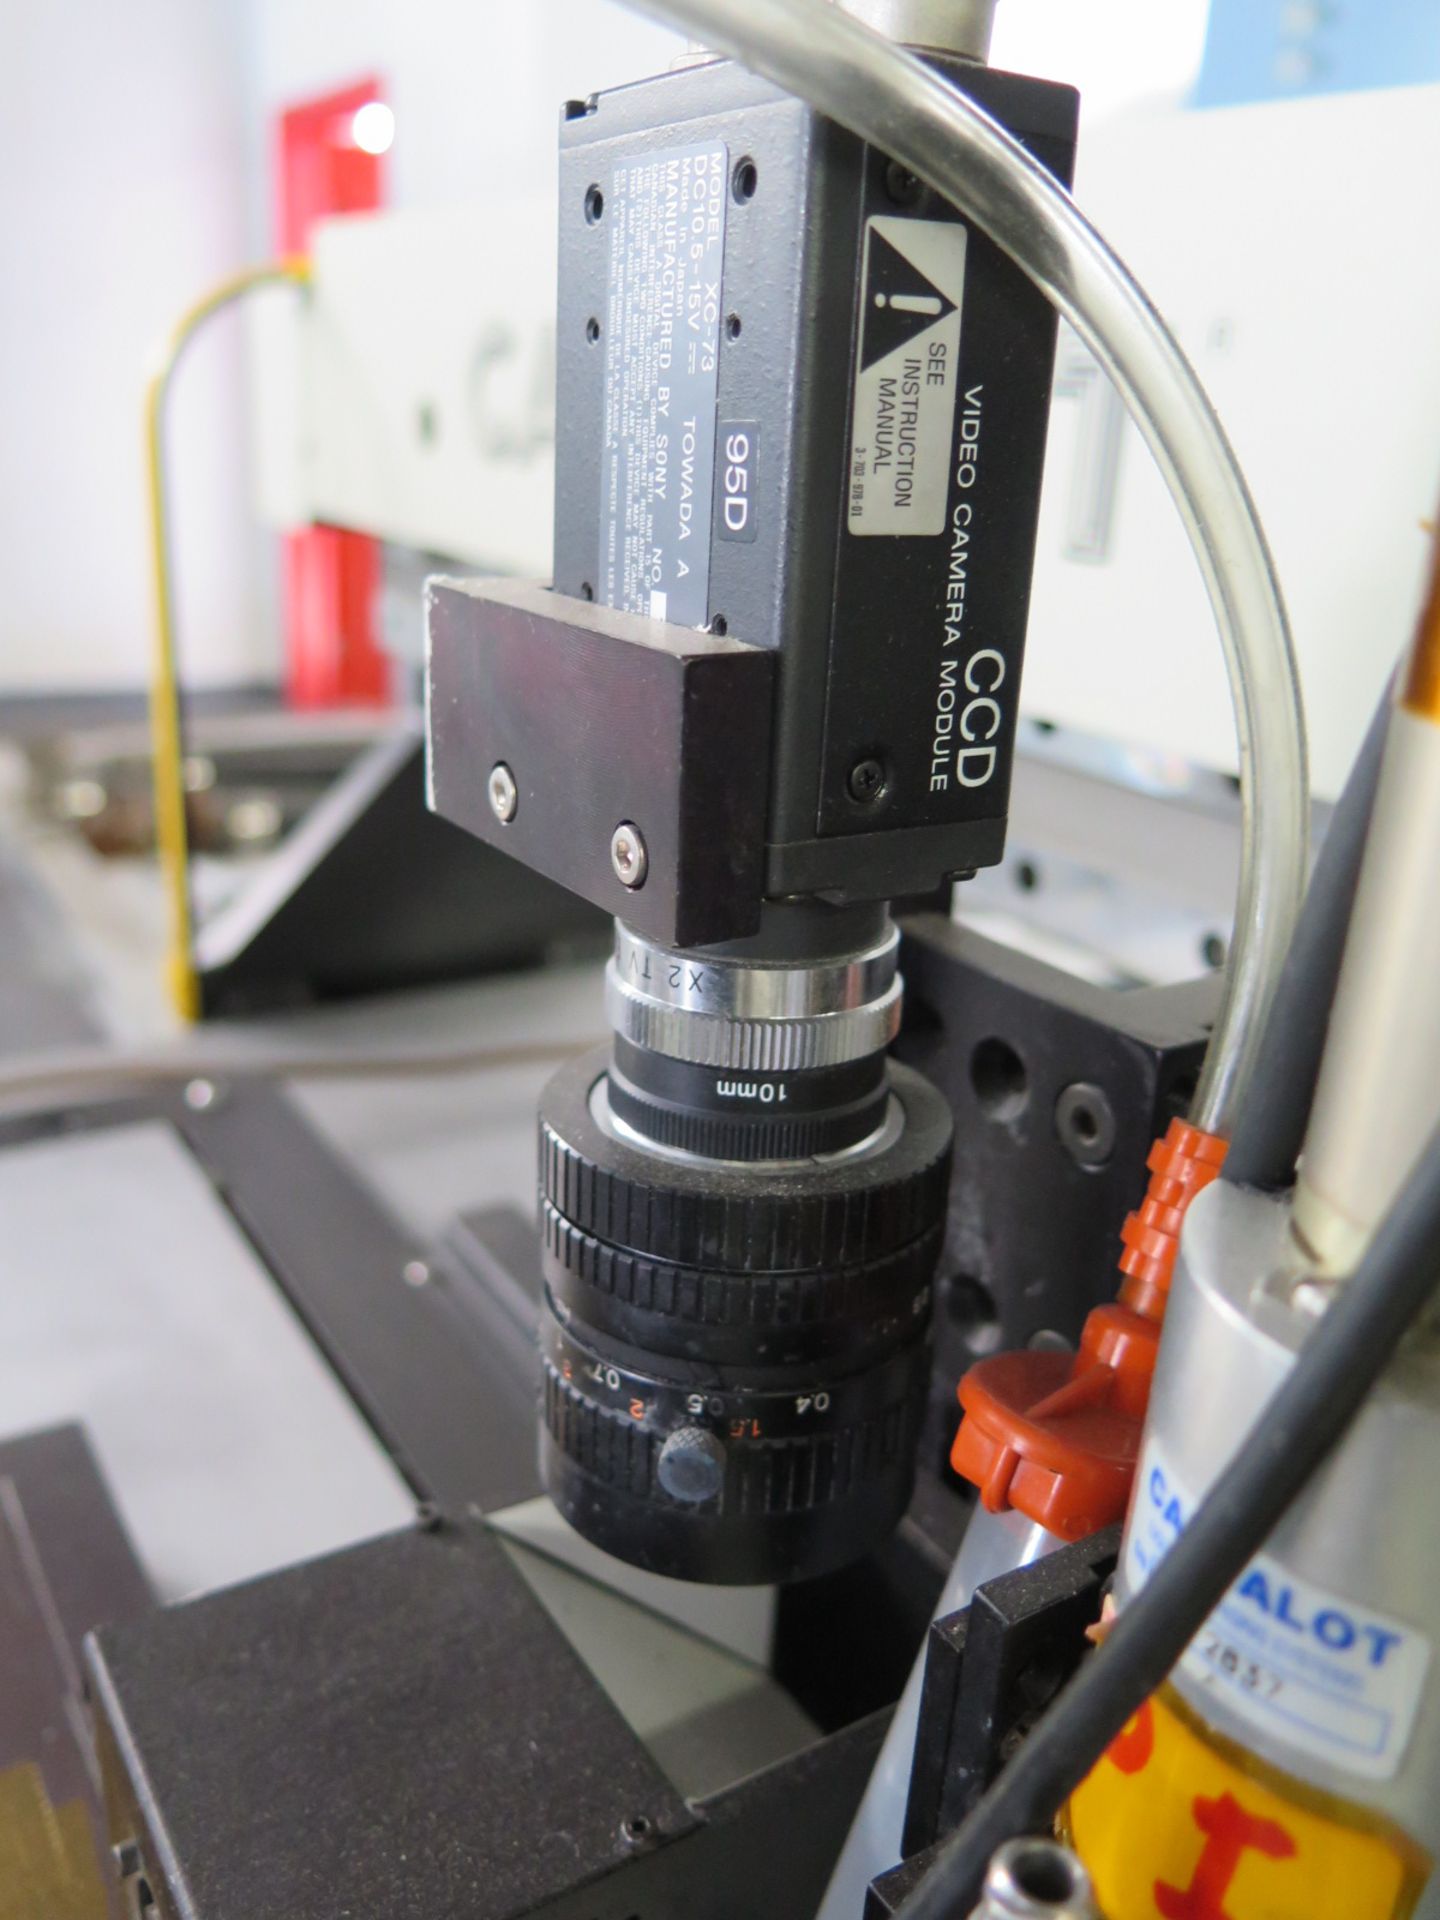 Camelot Systems “Cam/alot” mdl. 1818 CNC Dispensing System s/n 1818-2387 w/ Video Inspection System, - Image 6 of 9